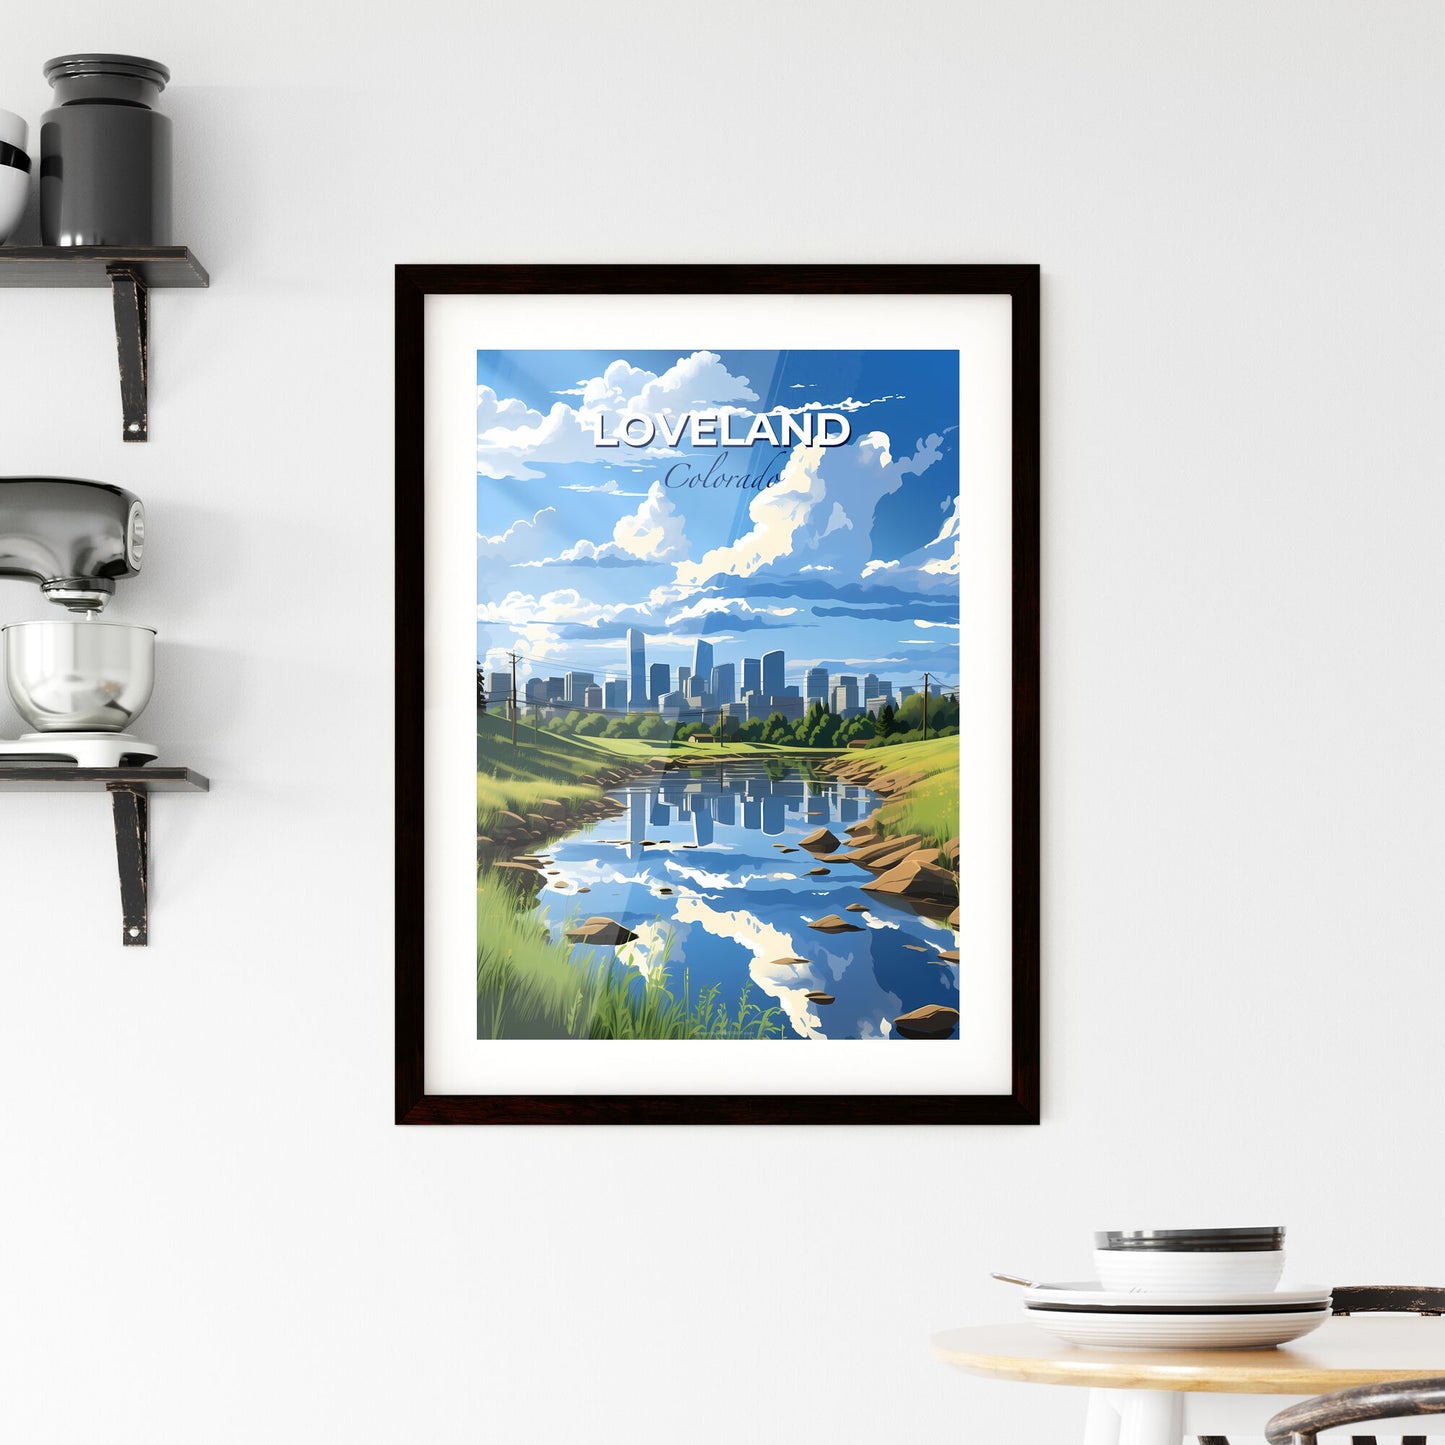 Loveland, Colorado, A Poster of a river with a city in the background Default Title